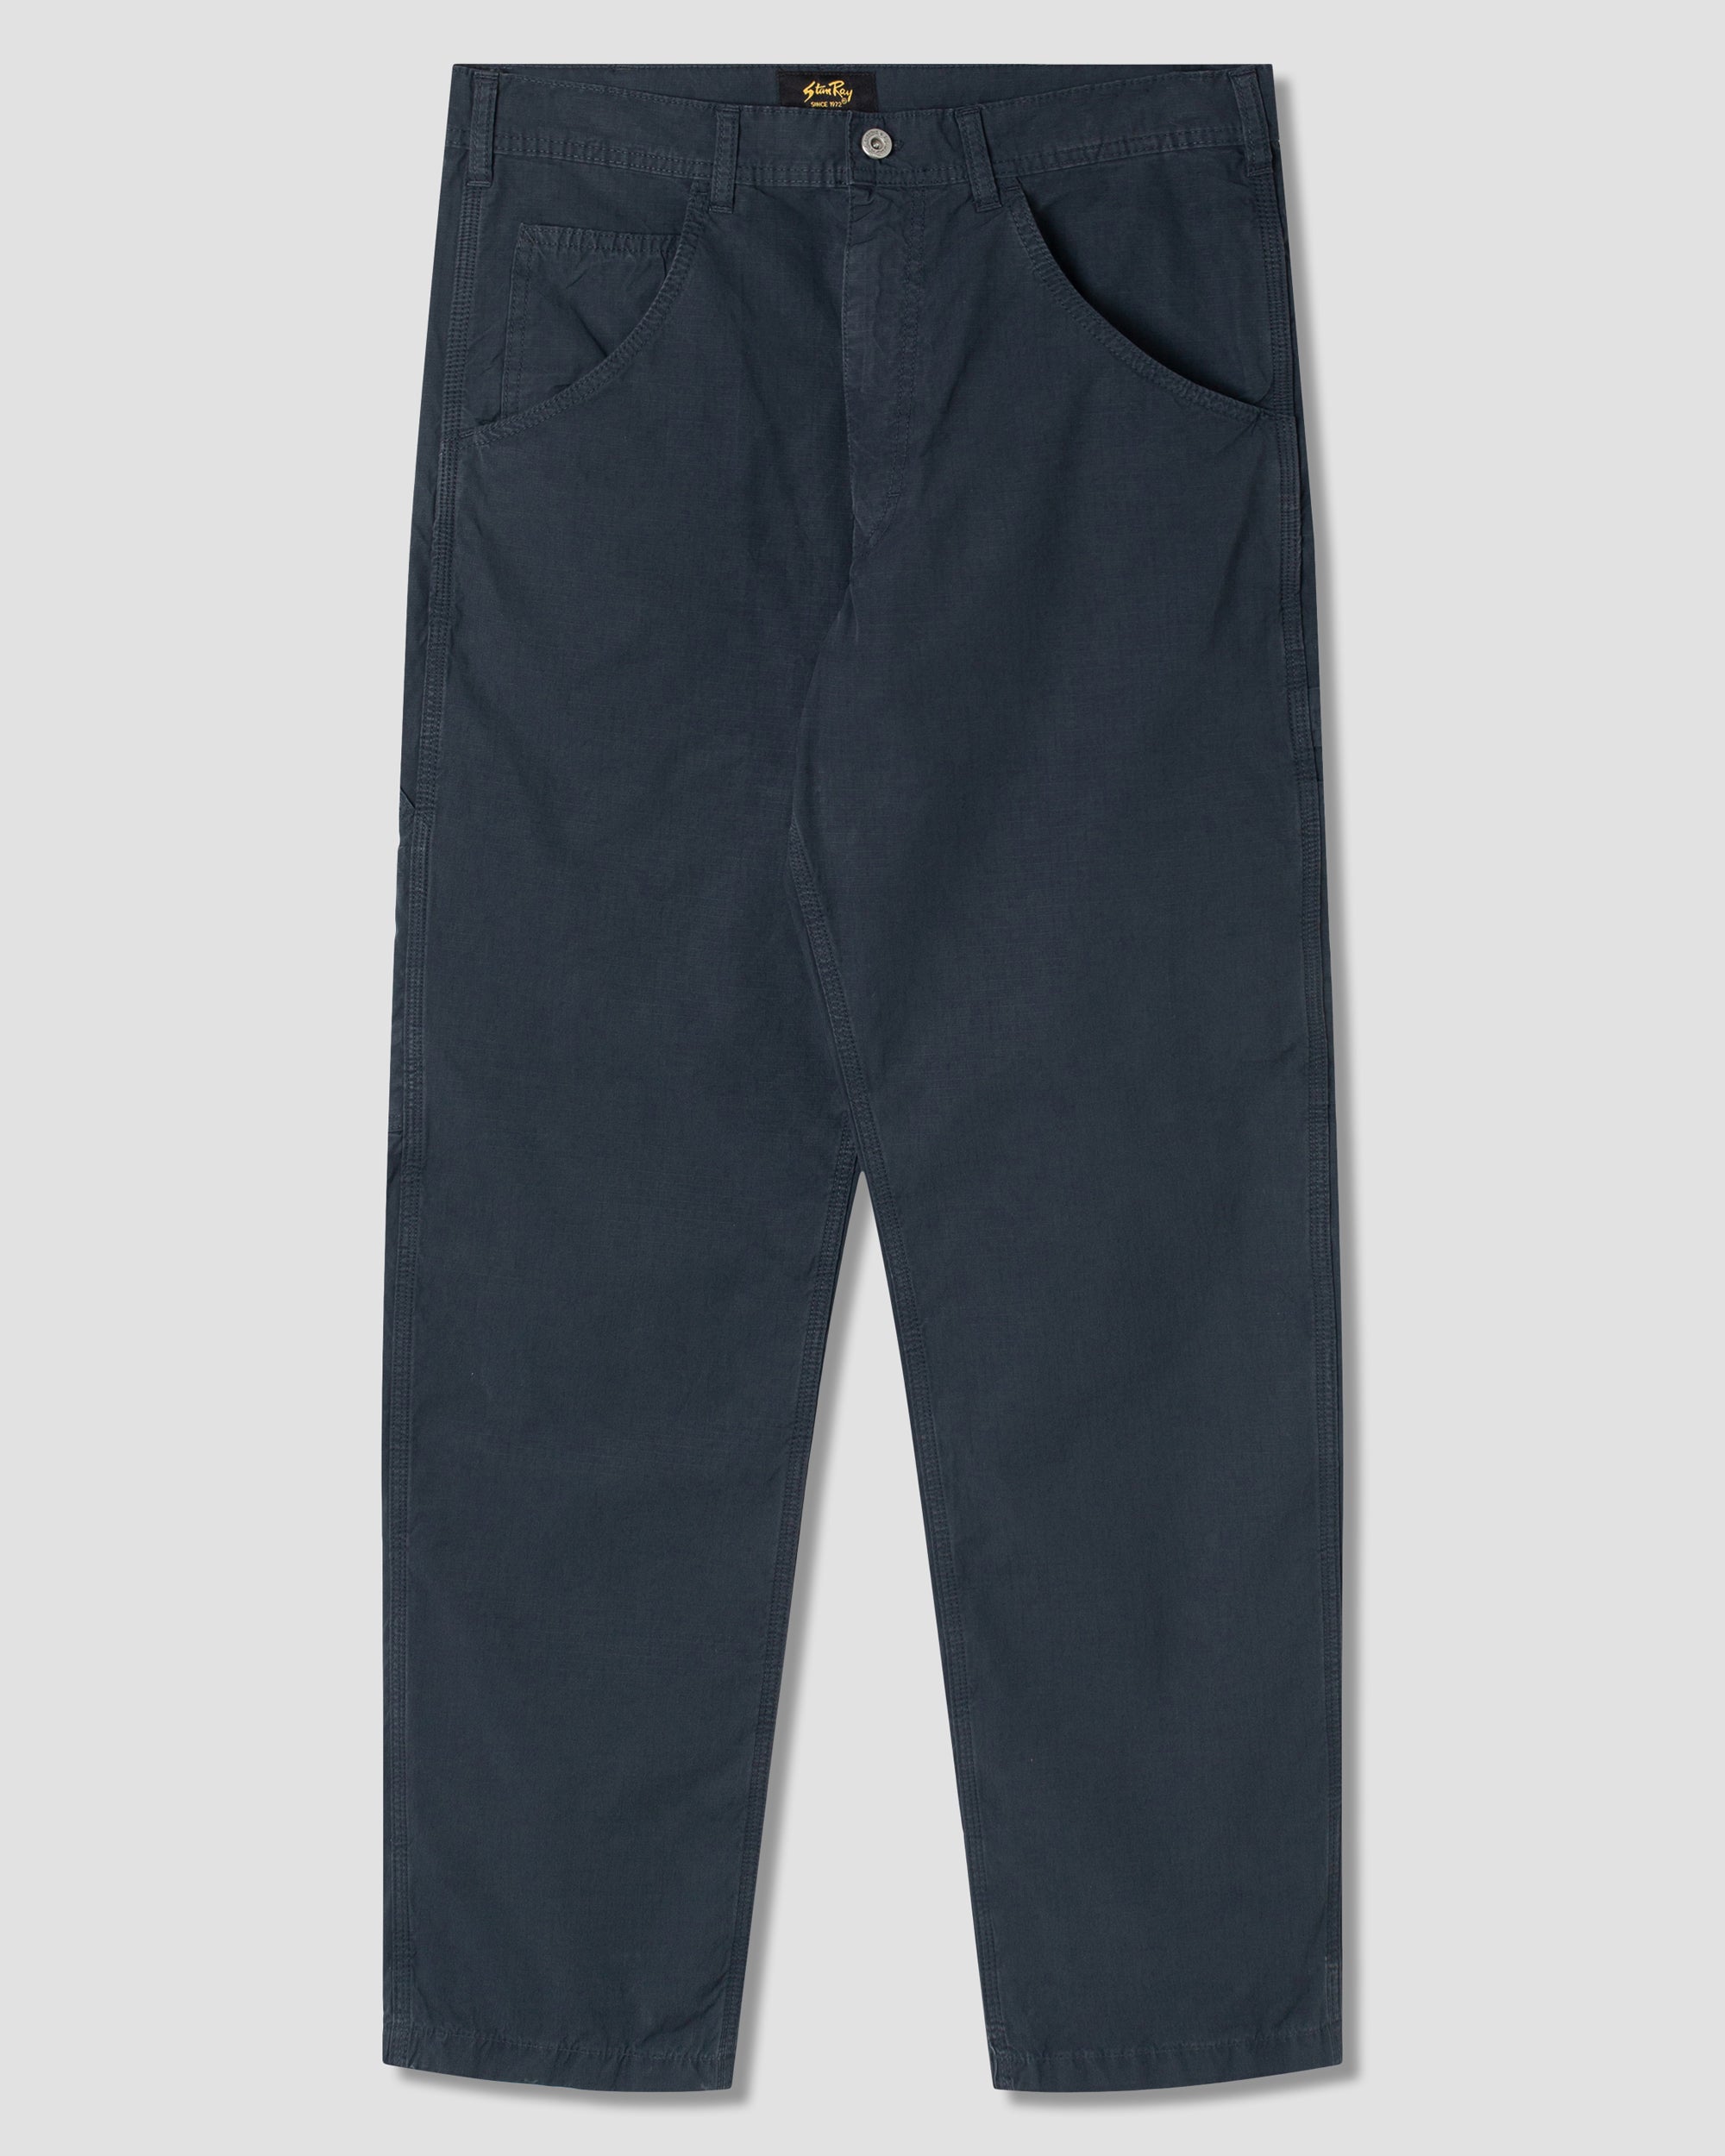 Stan Ray | 80S Ripstop Painter Pant - Navy